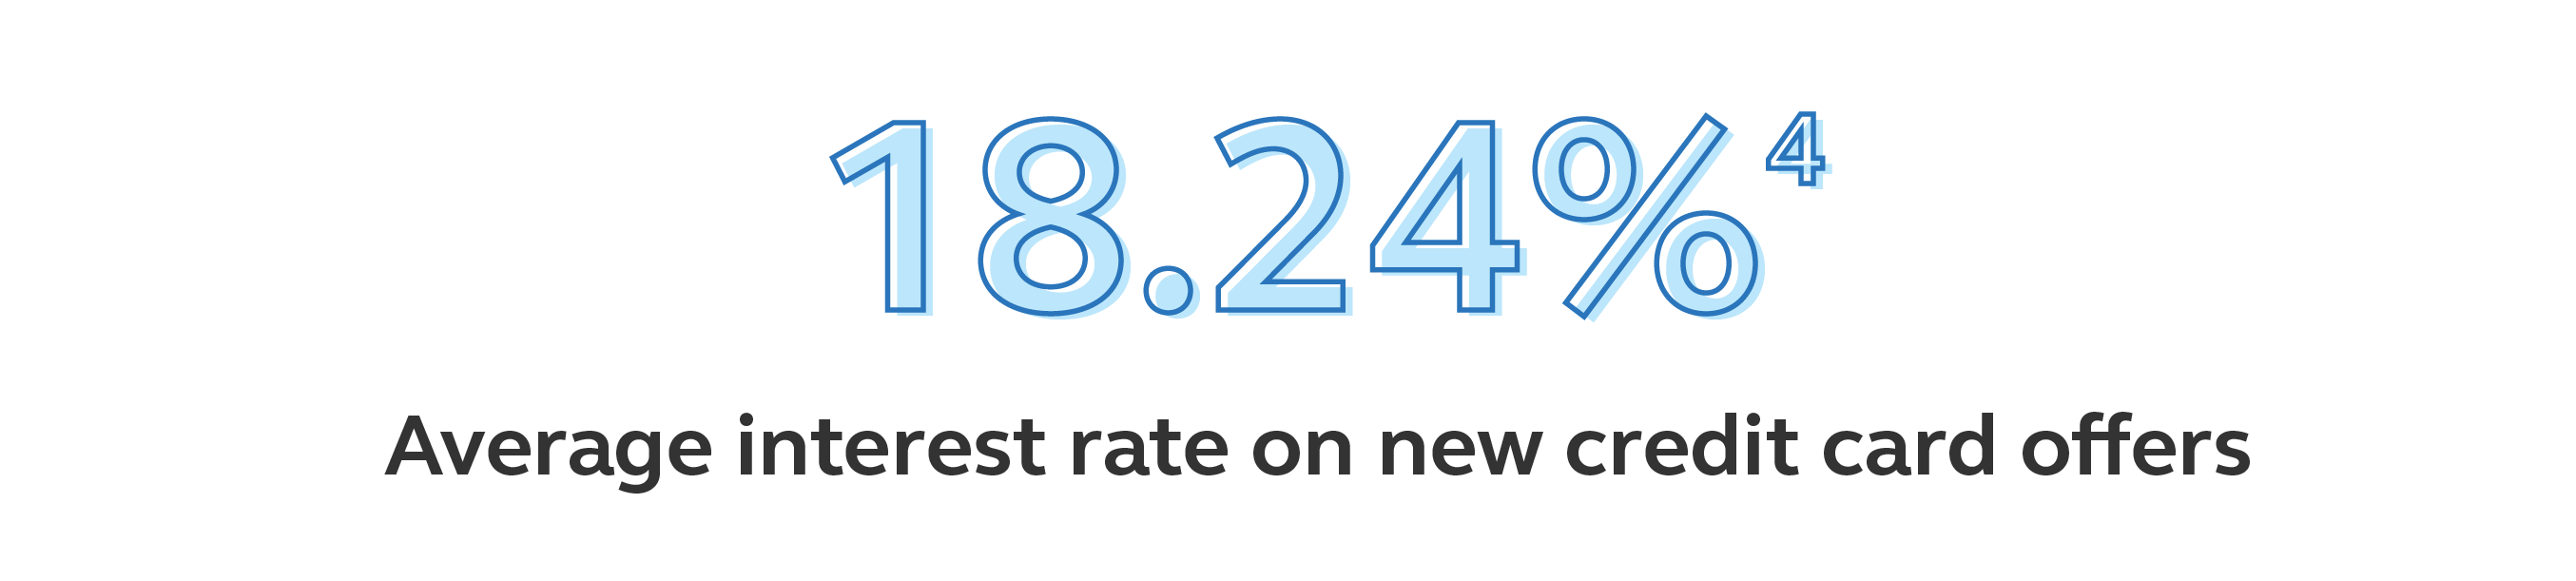 Illustration stating 18.24% is the average interest rate on new credit card offers.